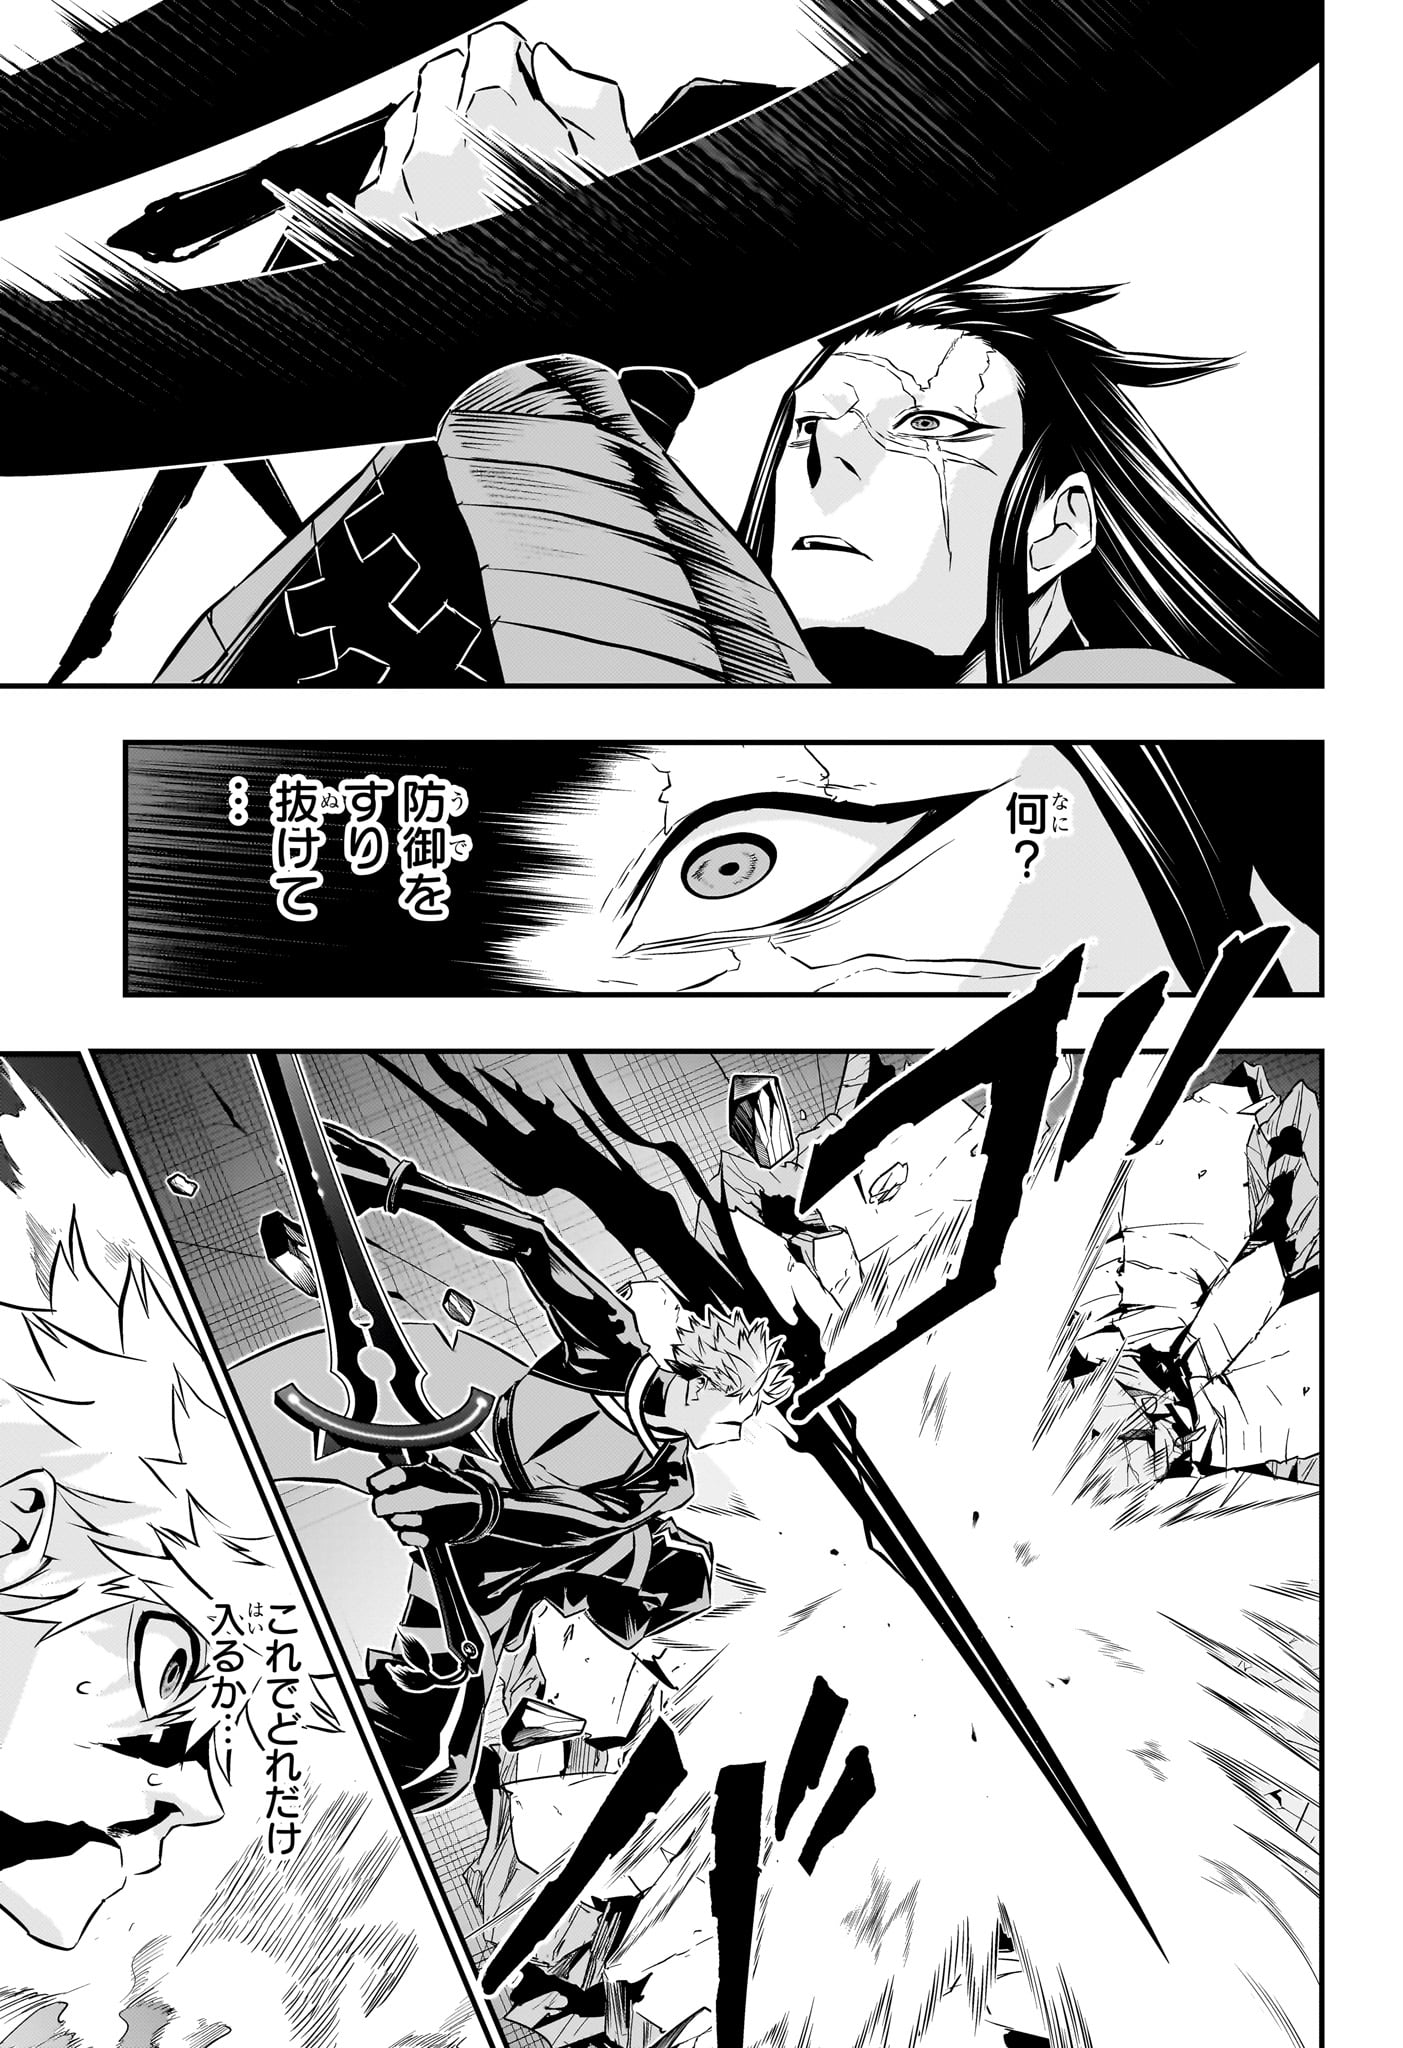 Nue no Onmyouji - Chapter 54 - Page 3